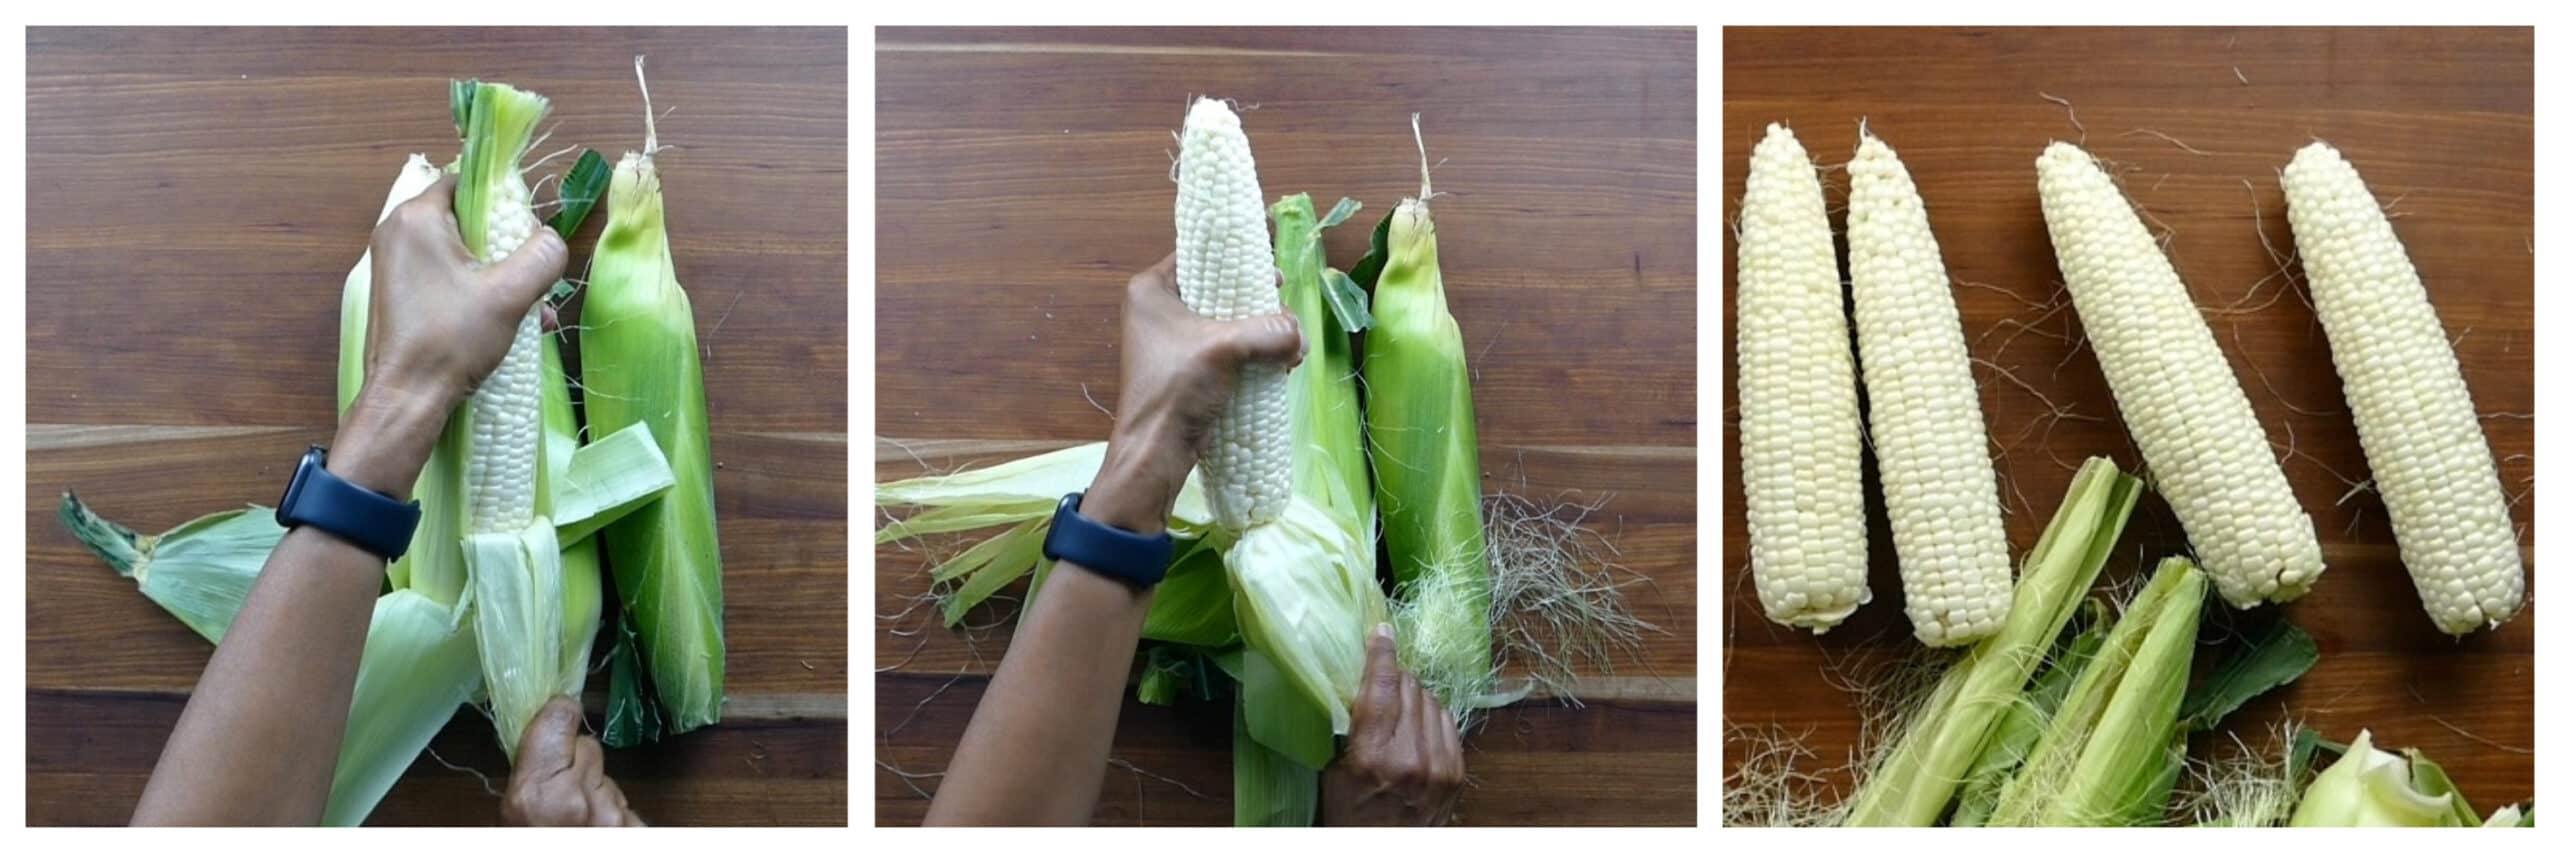 Shuck corn: pull down on one half of husk, pull down other half, four ears of corn husked